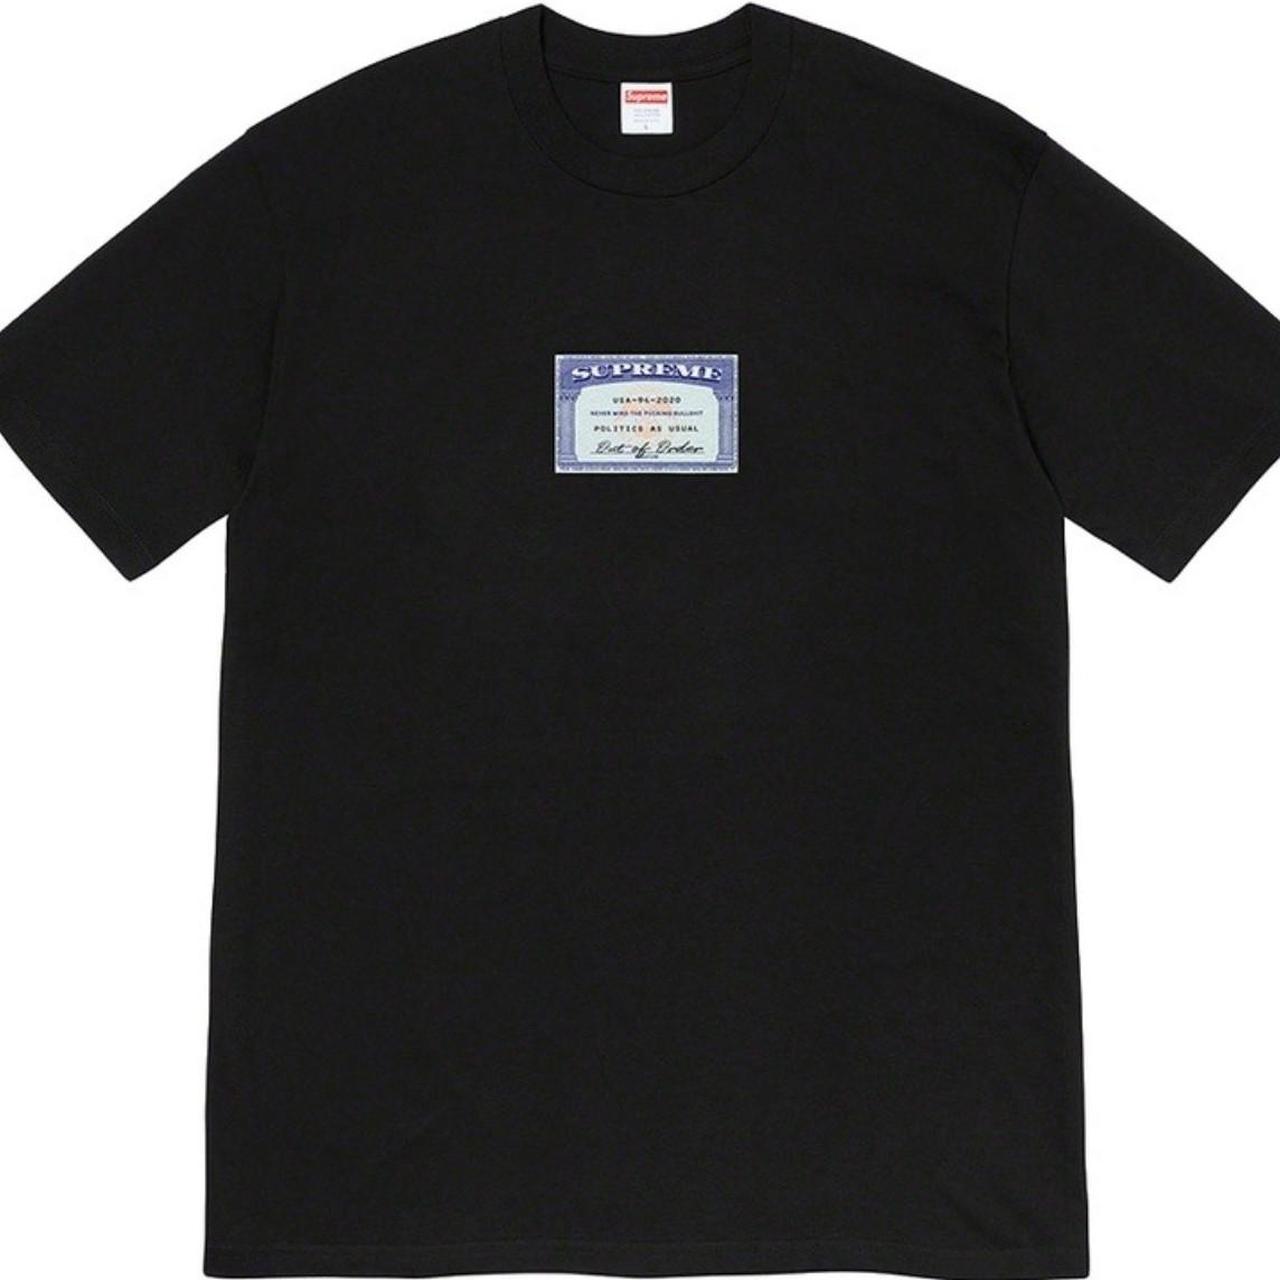 Product Image 2 - Supreme Social Tee in Black.